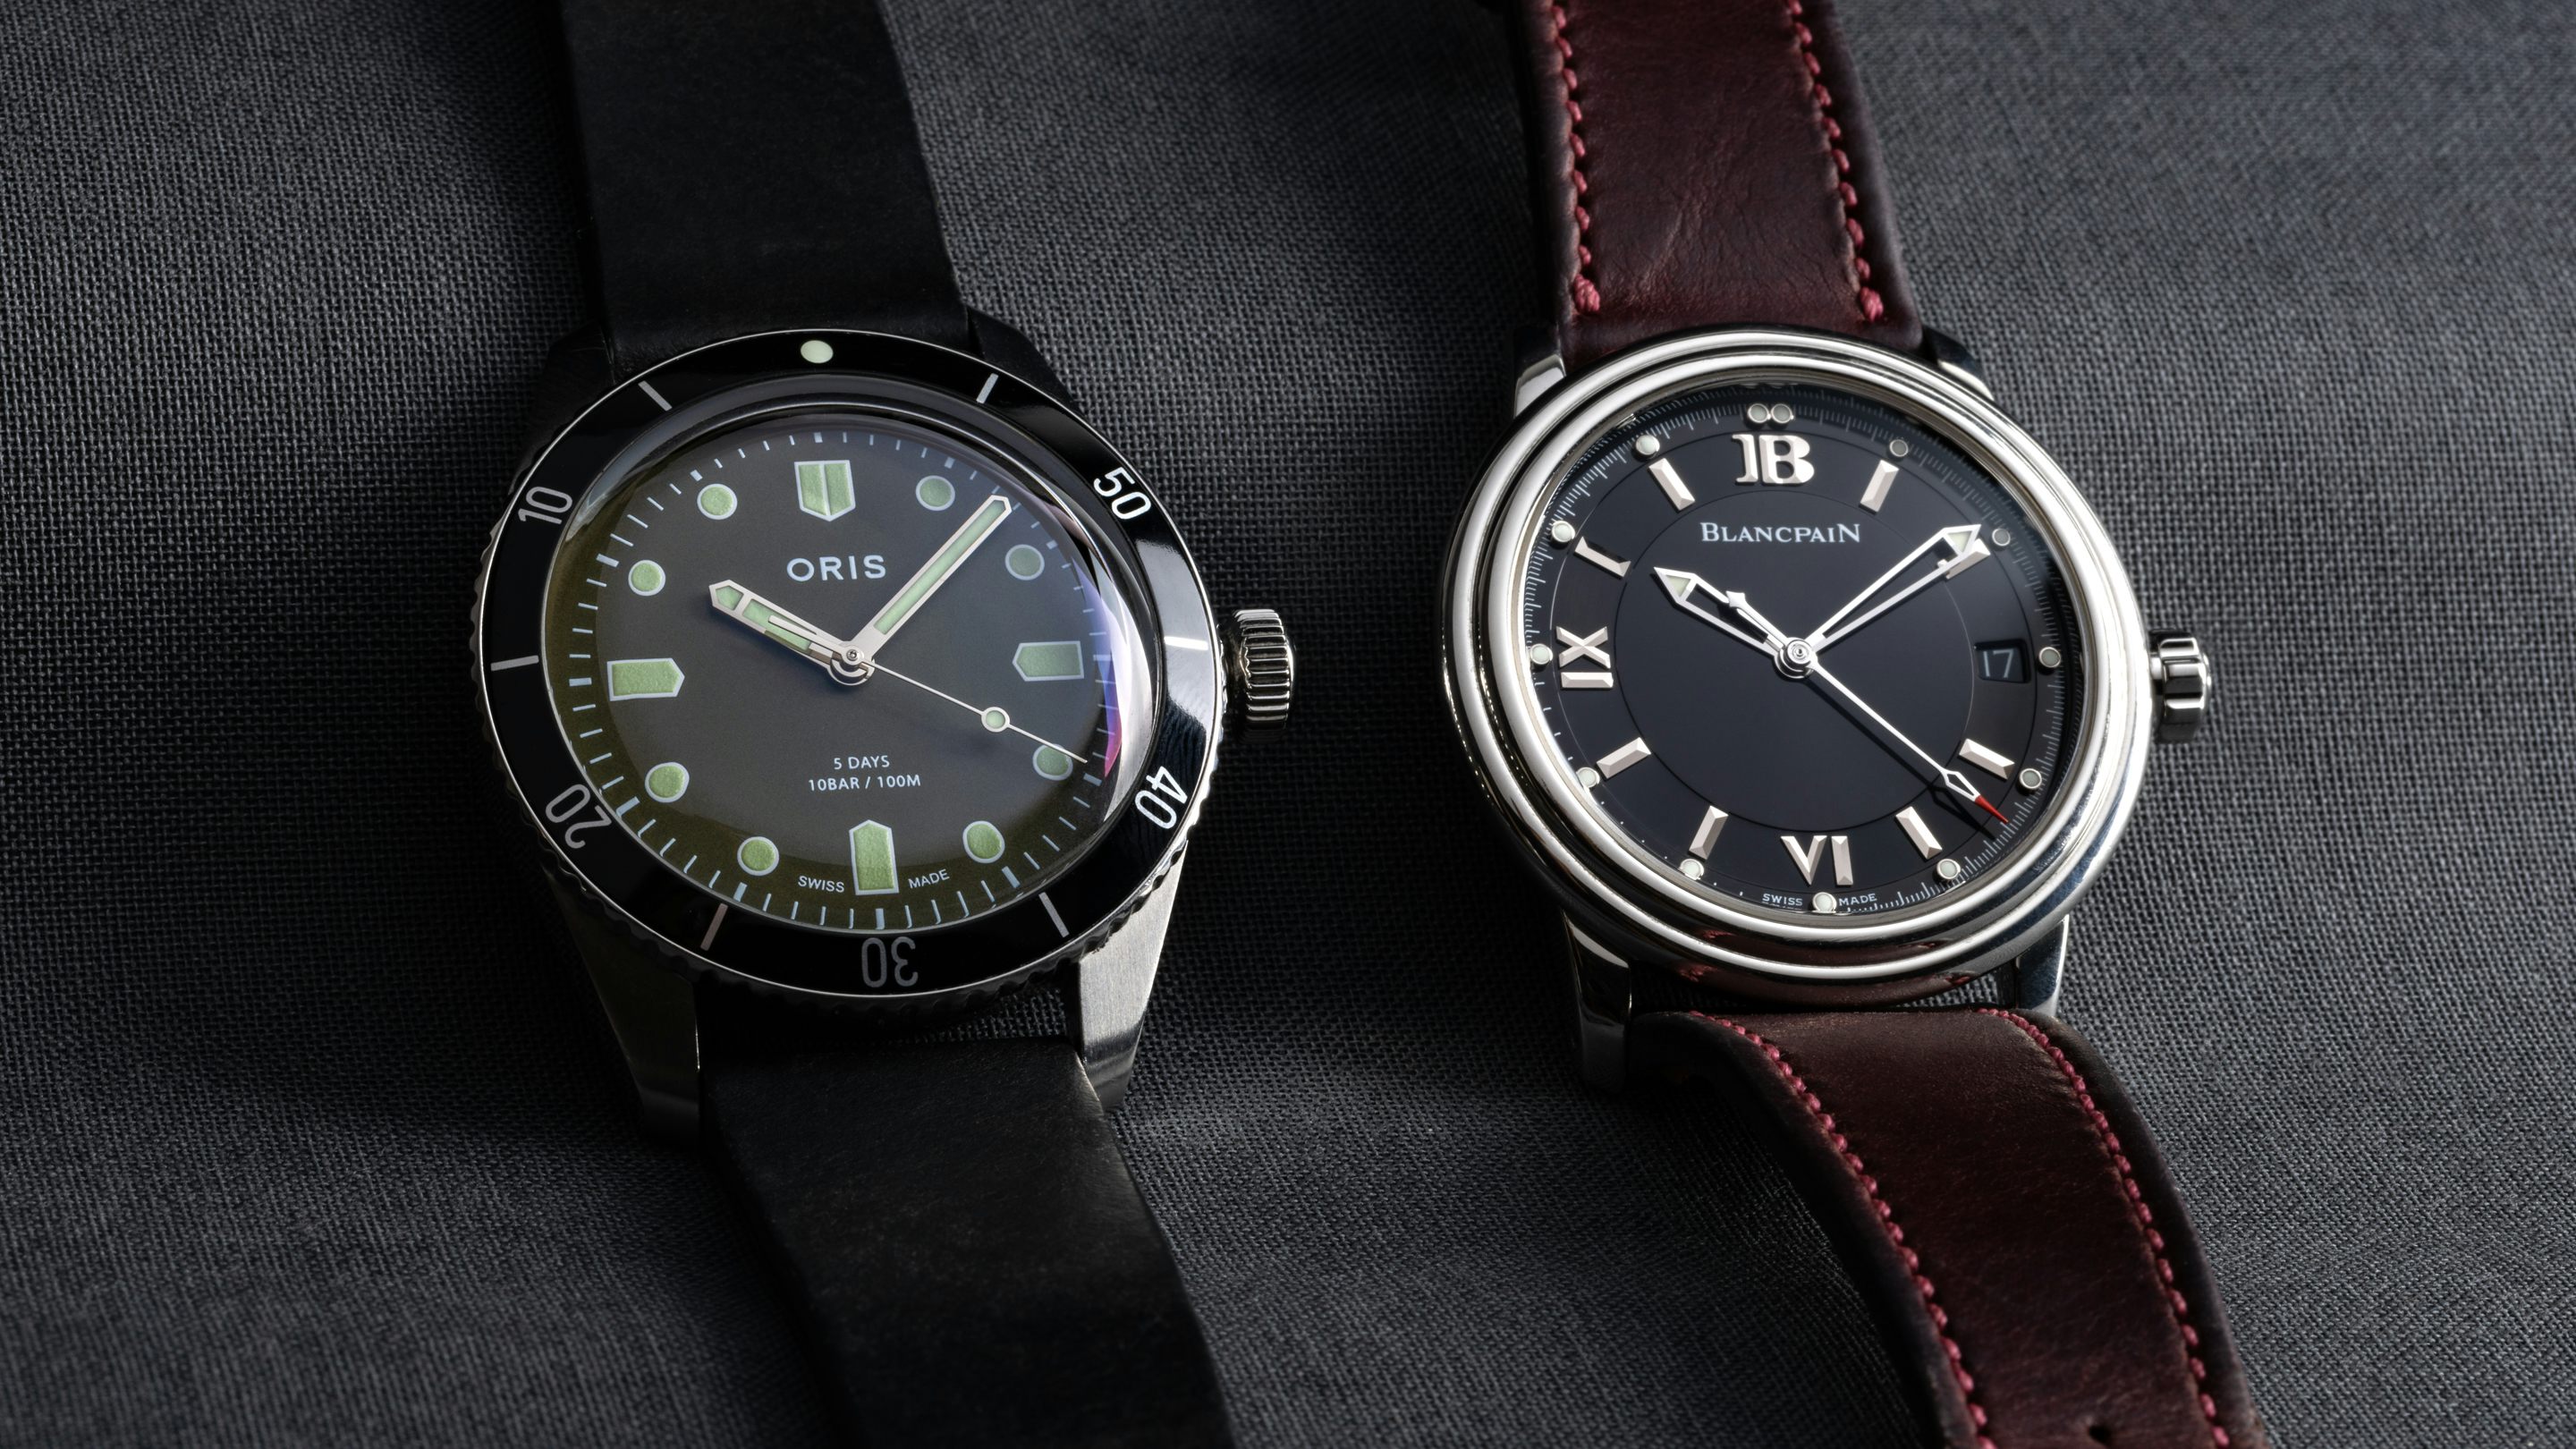 FRIDAY WIND DOWN: Best of Oris Edition